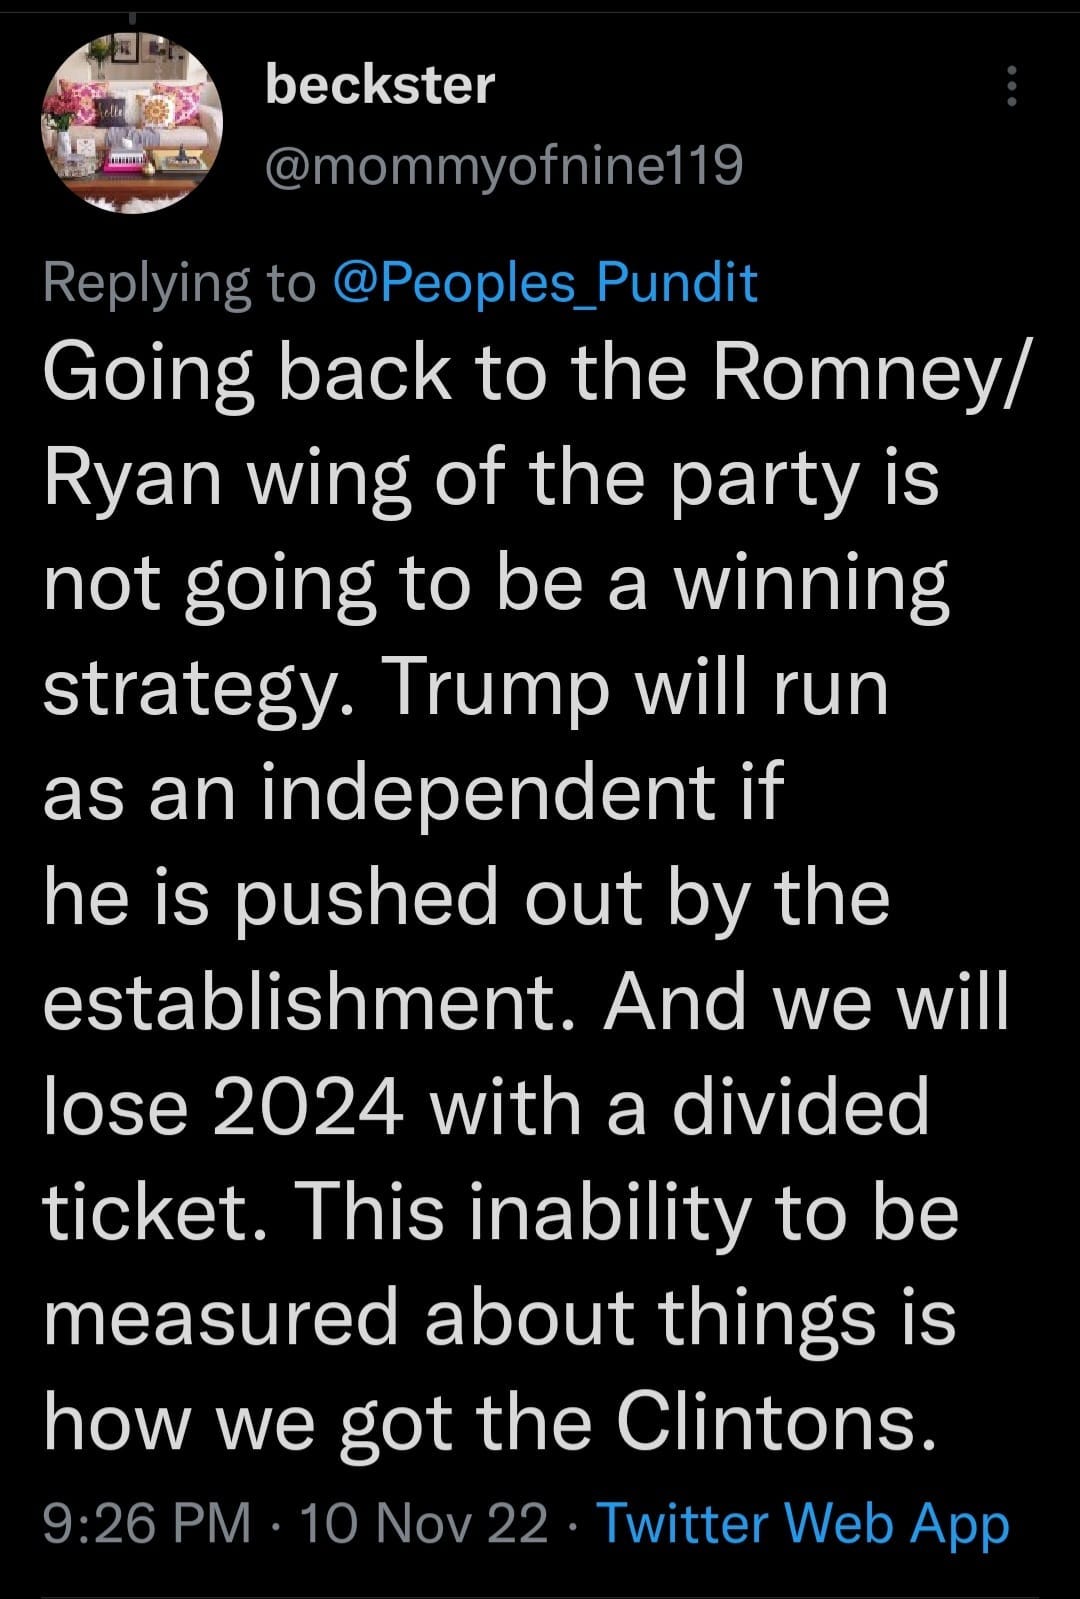 May be a Twitter screenshot of one or more people and text that says 'beckster @mommyofnine119 Replying to @Peoples Pundit Going back to the Romney/ Ryan wing of the party is not going to be a winning strategy. Trump will run as an independent if he is pushed out by the establishment. And we will lose 2024 with a divided ticket. This inability to be measured about things is how we got the Clintons. 9:26 PM 10 Nov22 Twitter Web App'